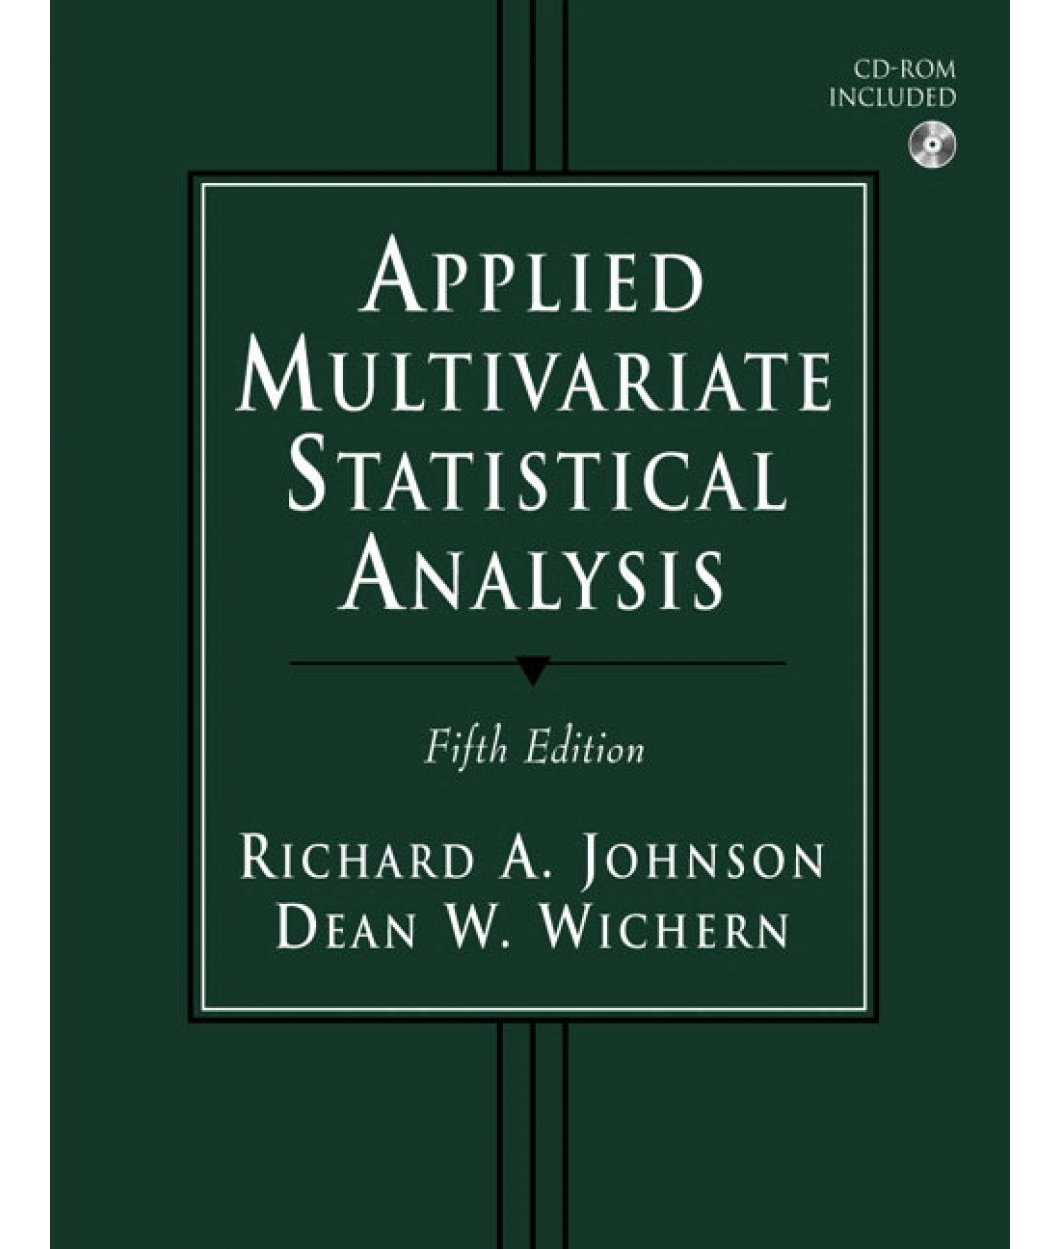 applied multivariate statistical analysis solutions